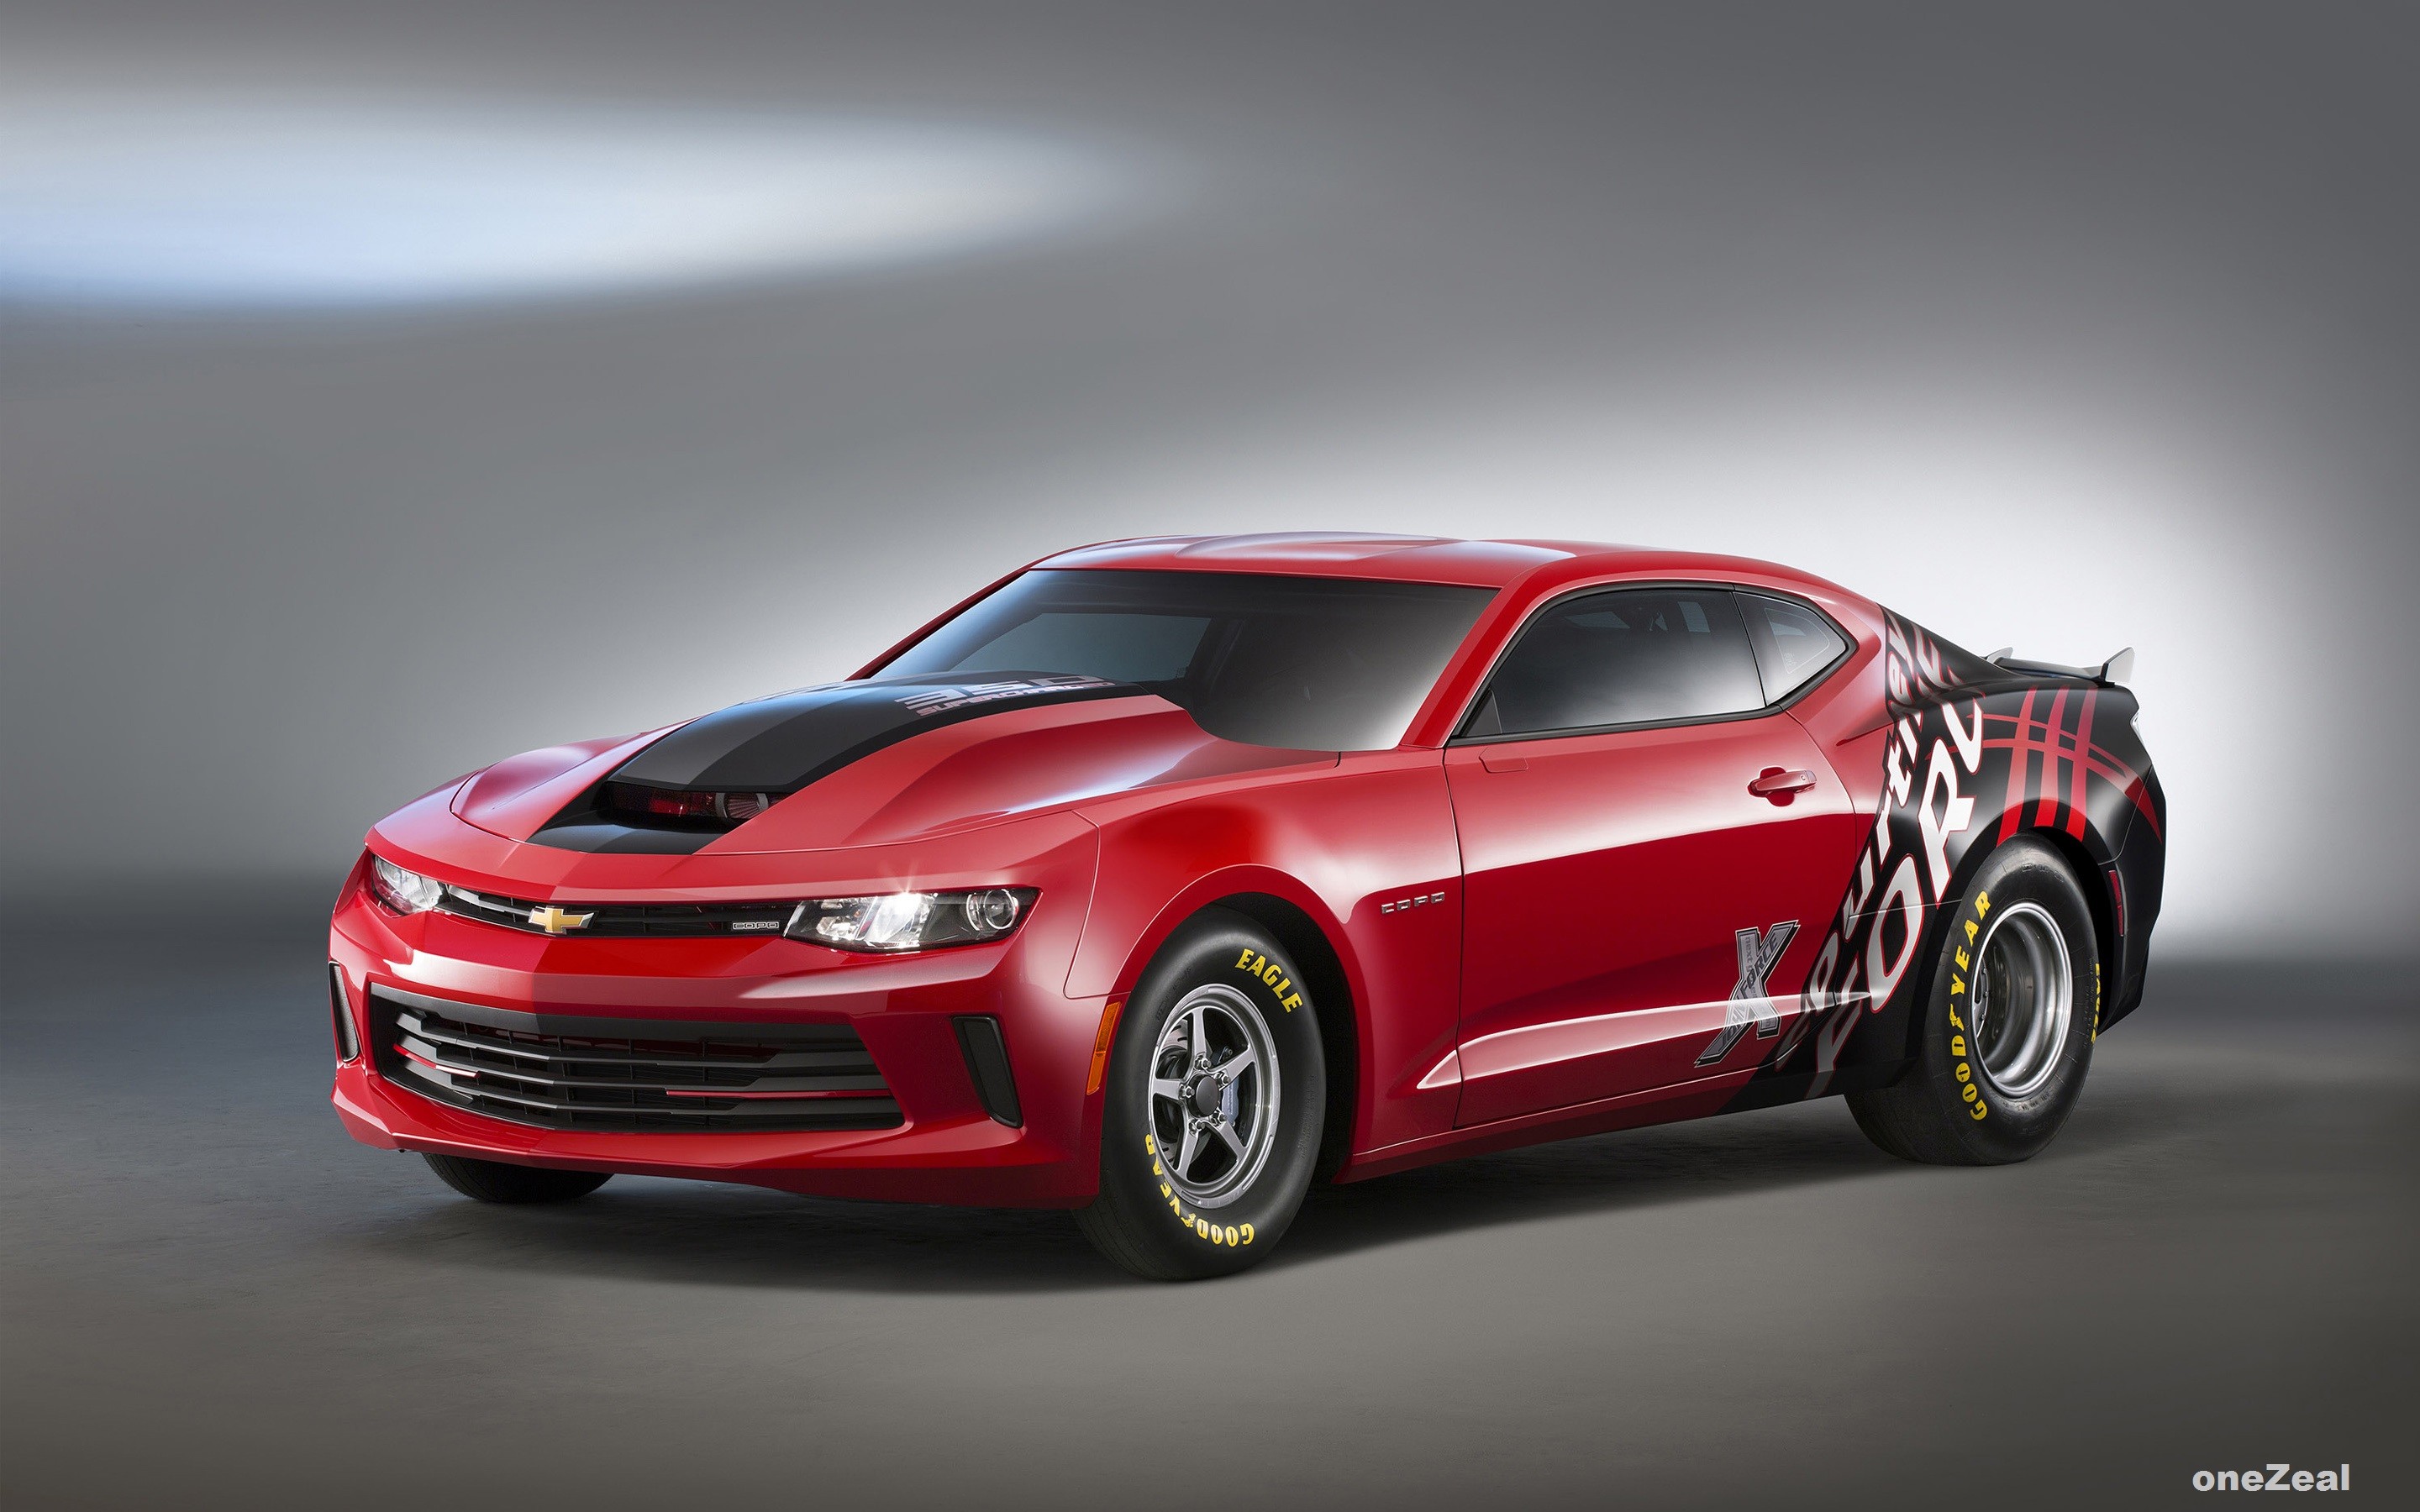 2880x1800 HD Chevrolet Copo Camaro 2016 Wallpapers for your Desktop Mobiles Tablets  in high quality HD Widescreen